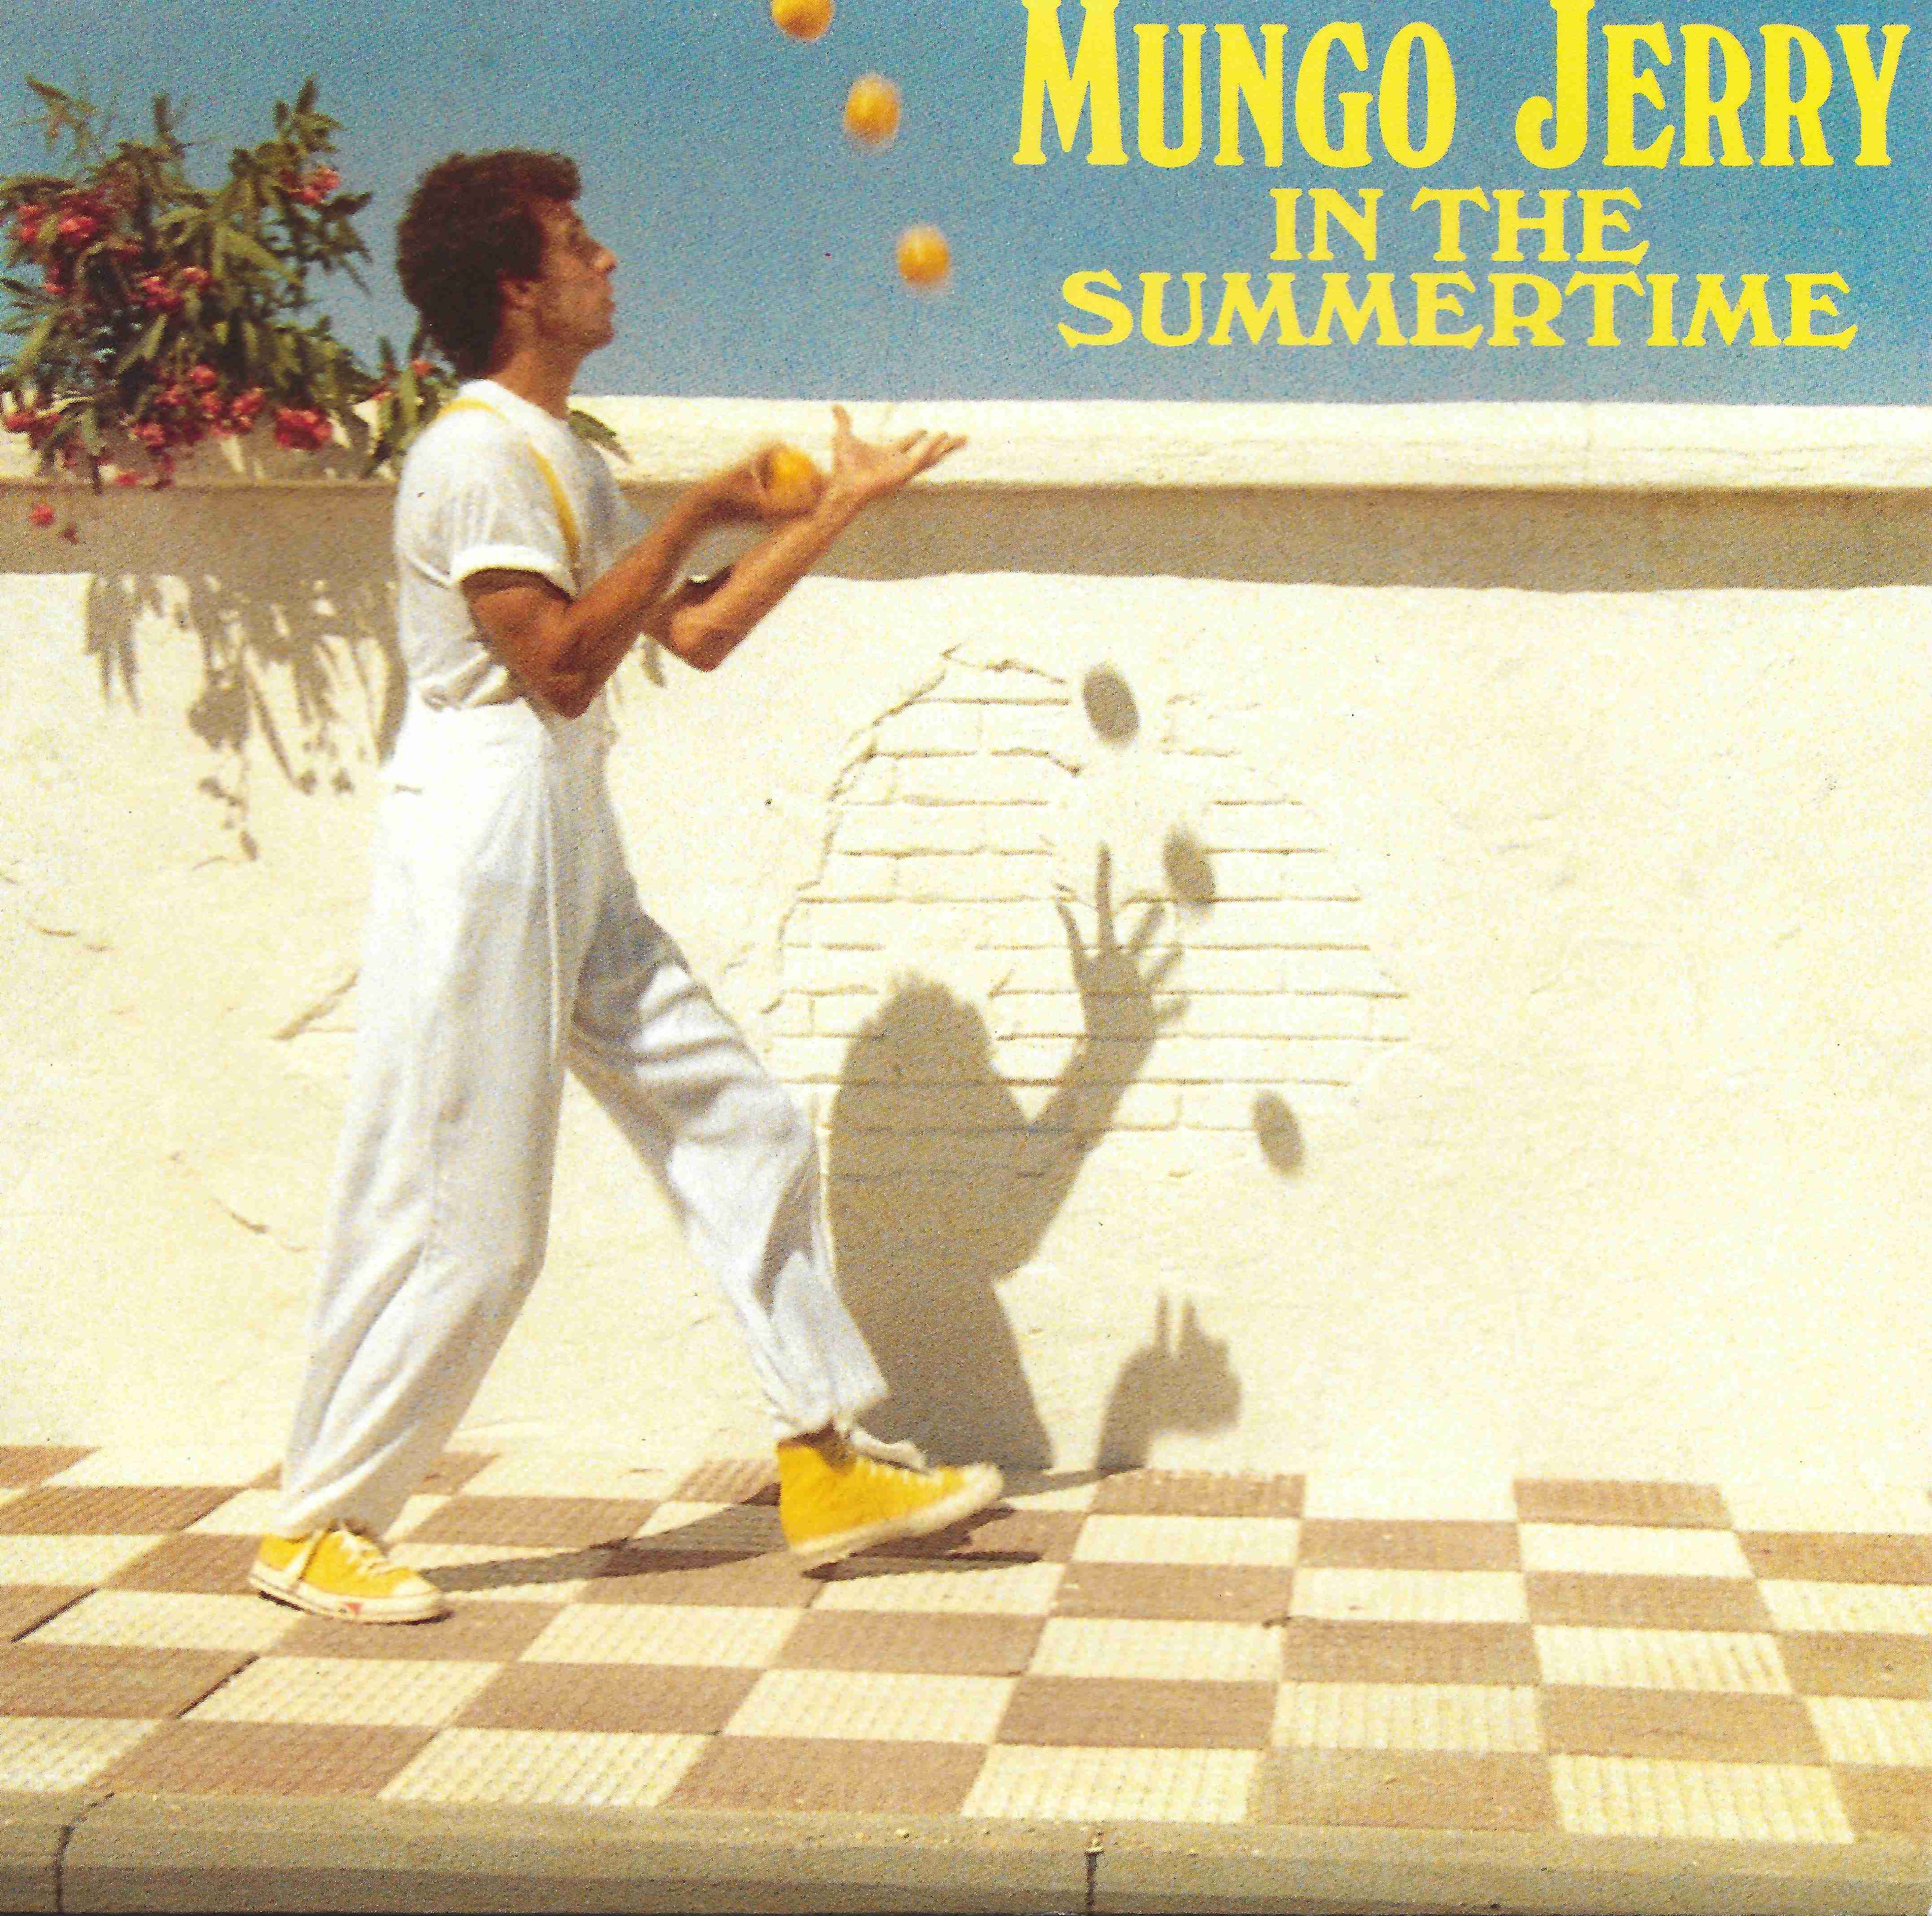 Picture of RESL 825 In the summertime by artist Mungo Jerry from the BBC singles - Records and Tapes library